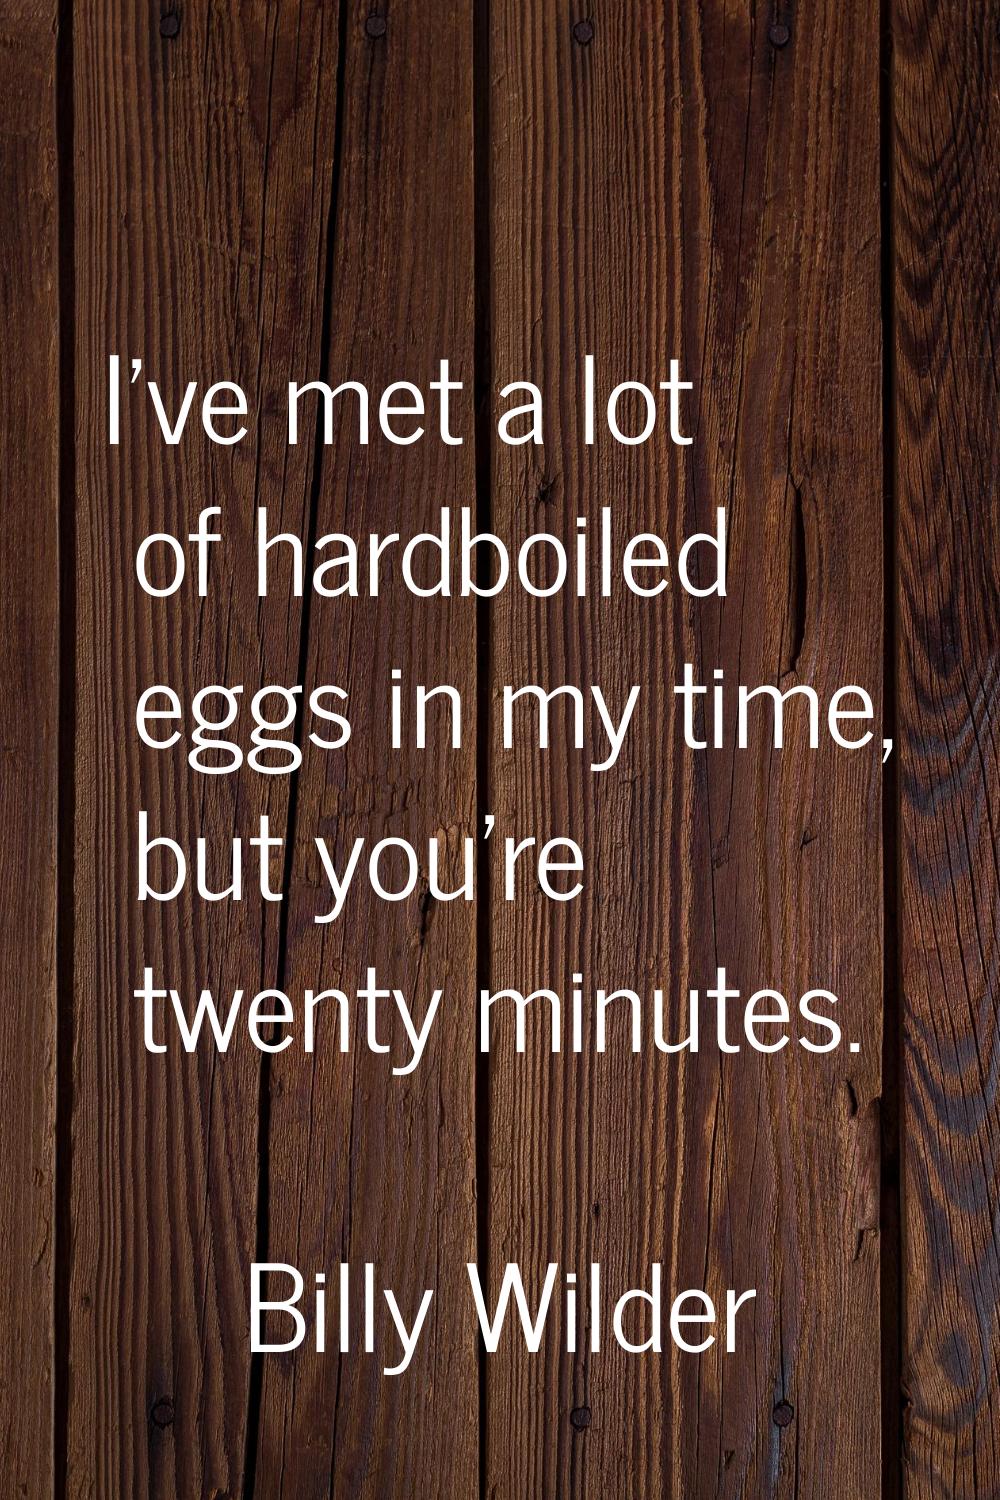 I've met a lot of hardboiled eggs in my time, but you're twenty minutes.